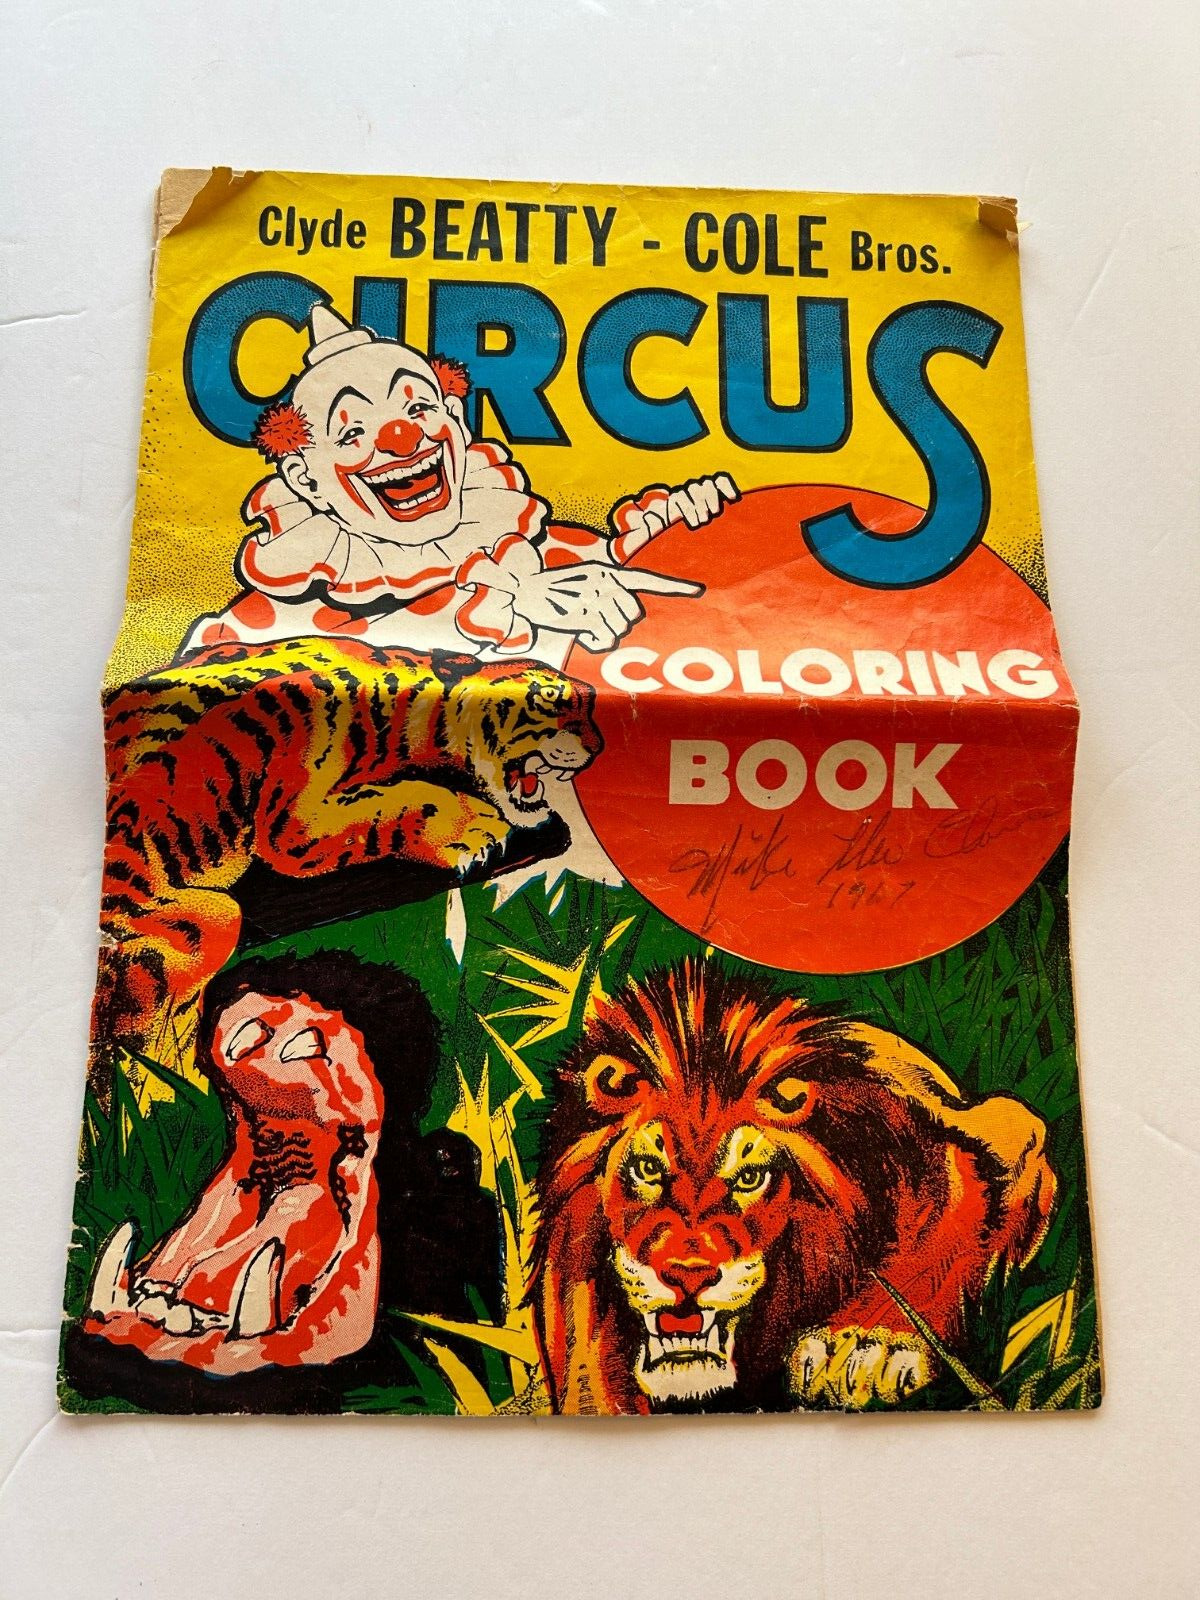 Clyde Beatty Cole Bros Circus Coloring Book Signed Mike The Clown 1967 13.5 x 10